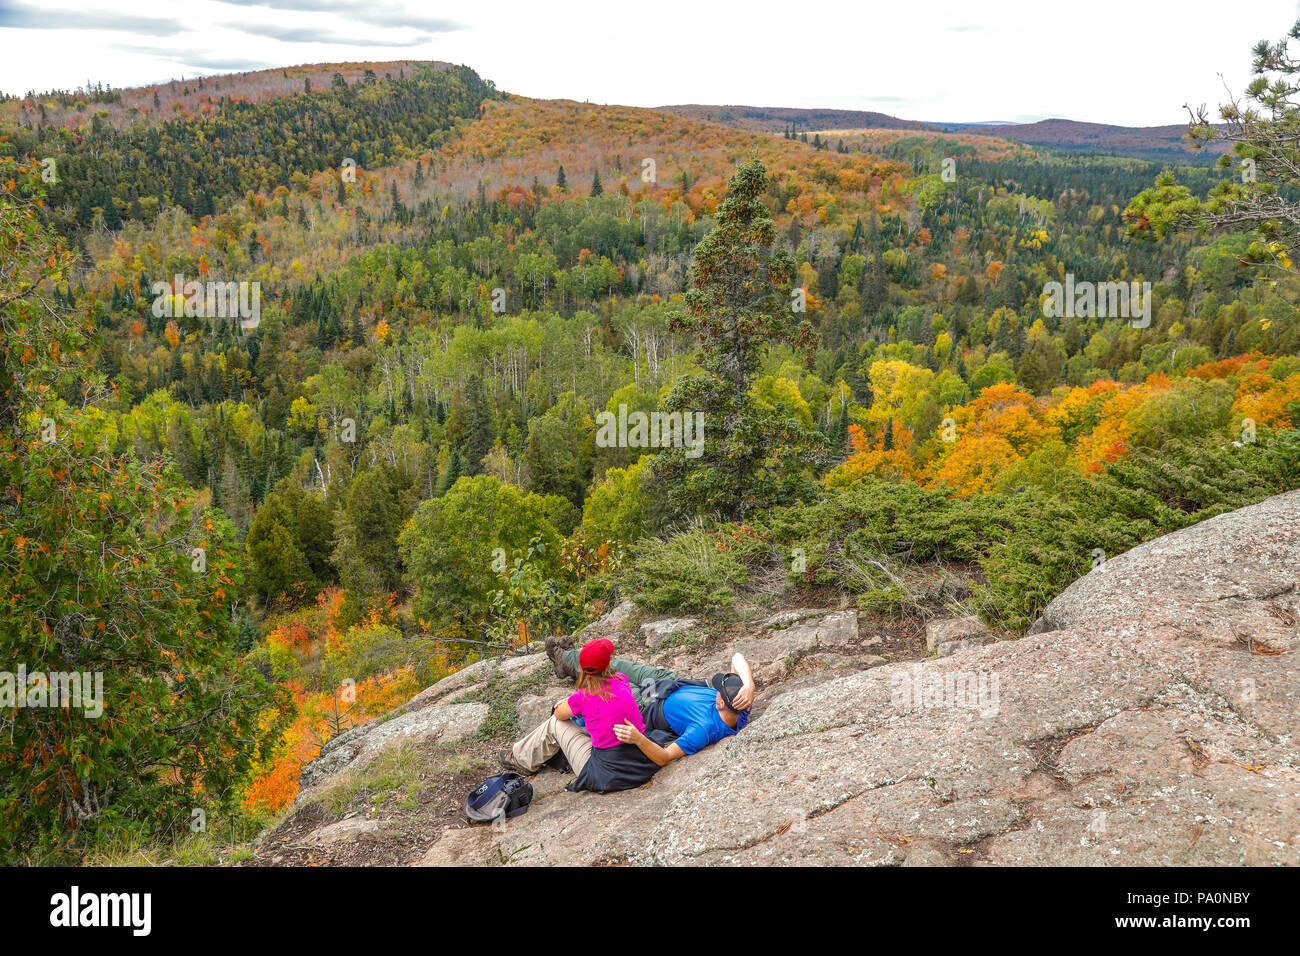 Scenery with forest and hikers at Oberg Mountain hiking trail, Tofte, Minnesota, USA Stock Photo